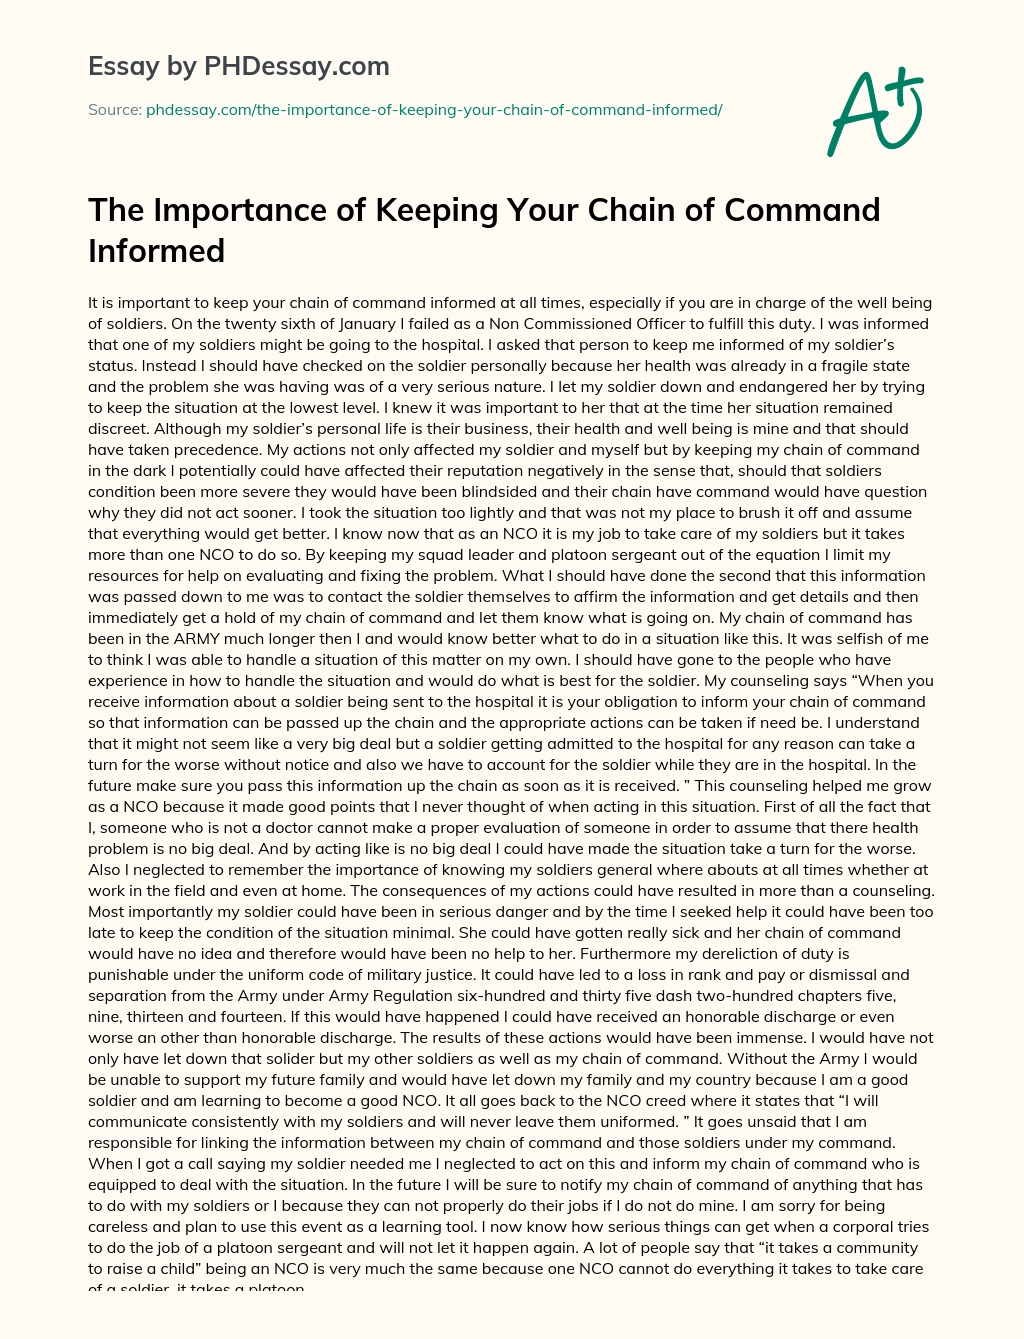 The Importance of Keeping Your Chain of Command Informed essay